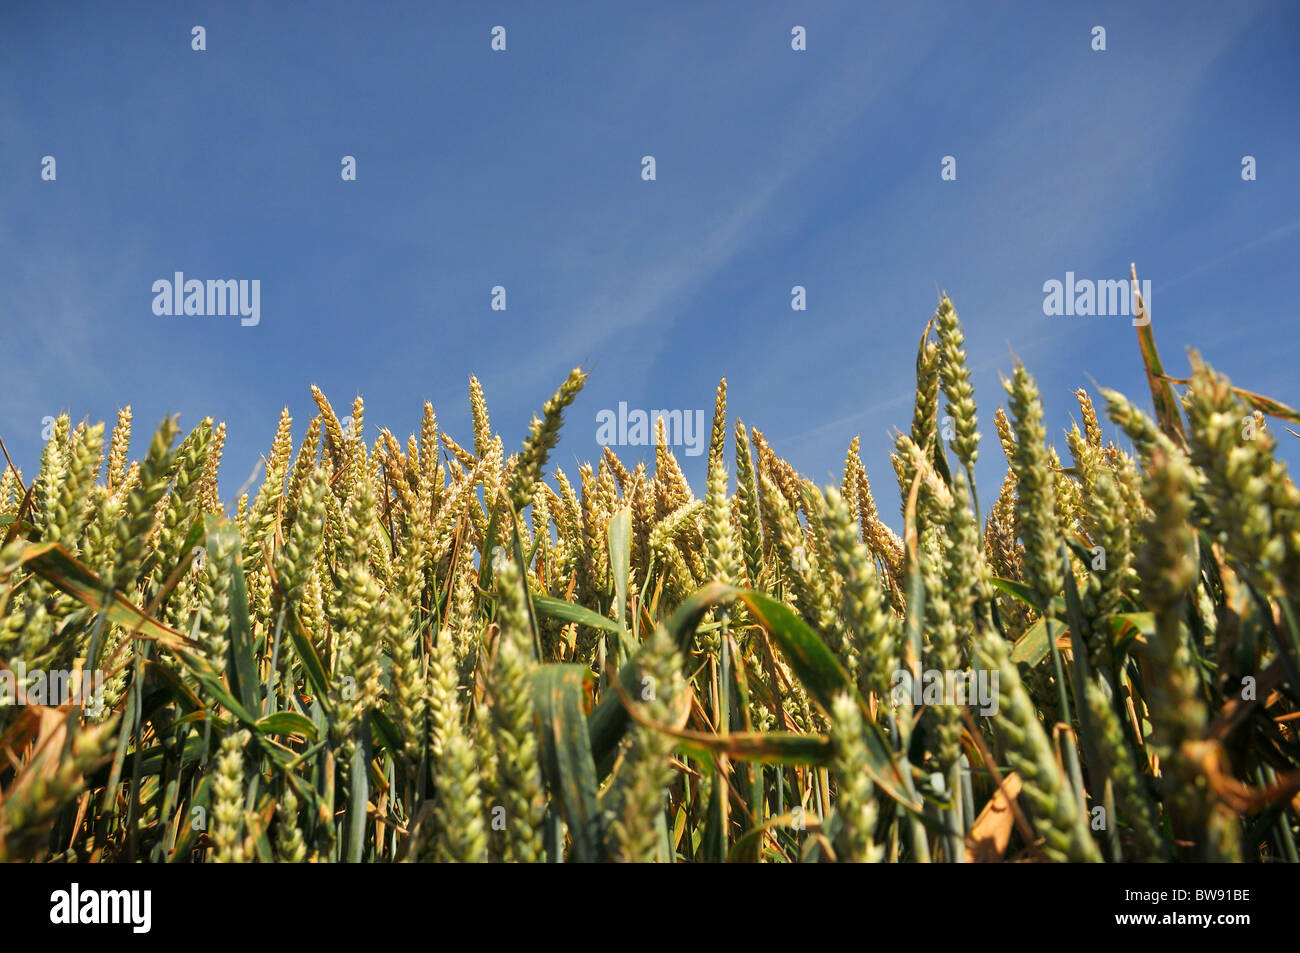 Wheat crop slightly green seen from low down ripening agains a blue summer sky Stock Photo